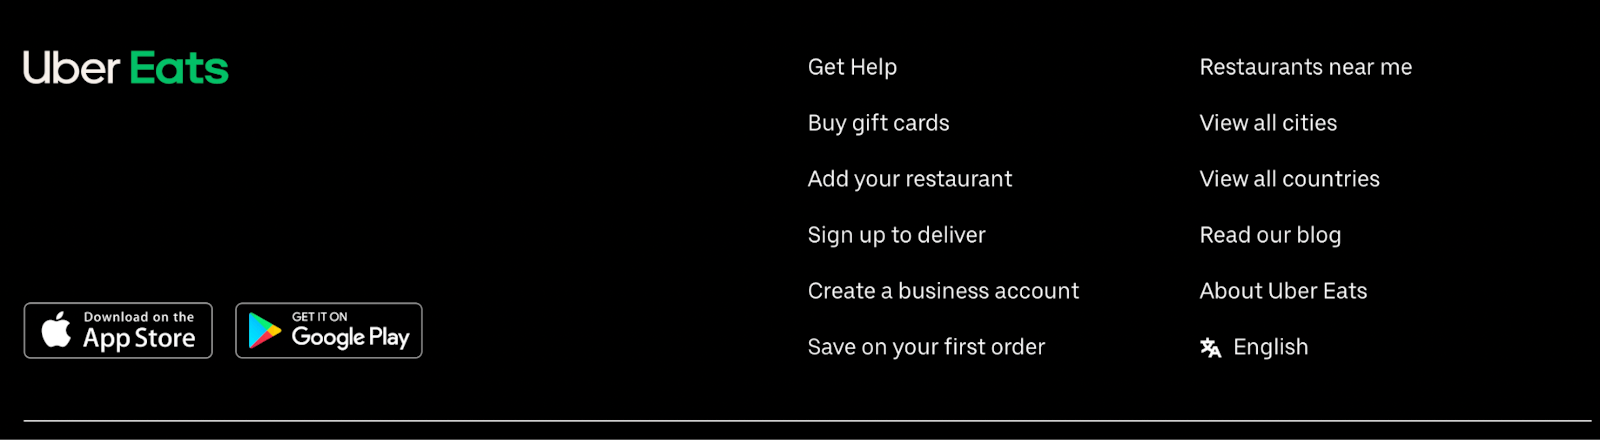 Image of the Uber Eats website footer 